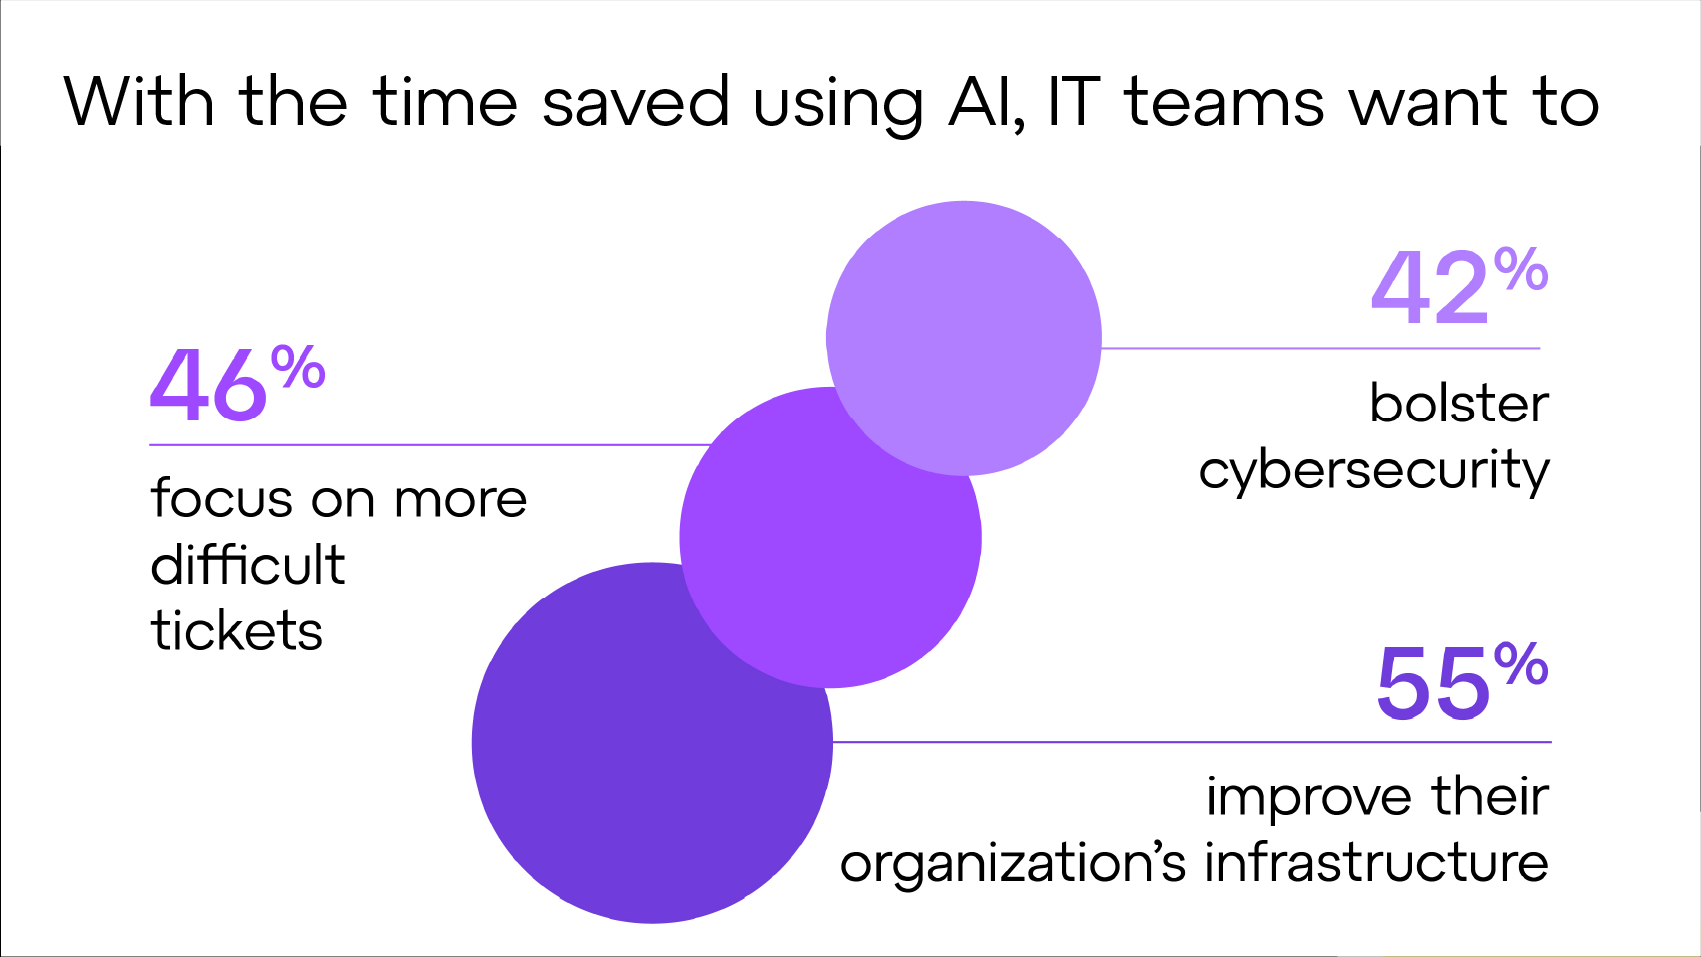 With the time saved using AI, IT teams want to focus on more difficult tickets, bolster cybersecurity, and improve their organization's infrastructure.